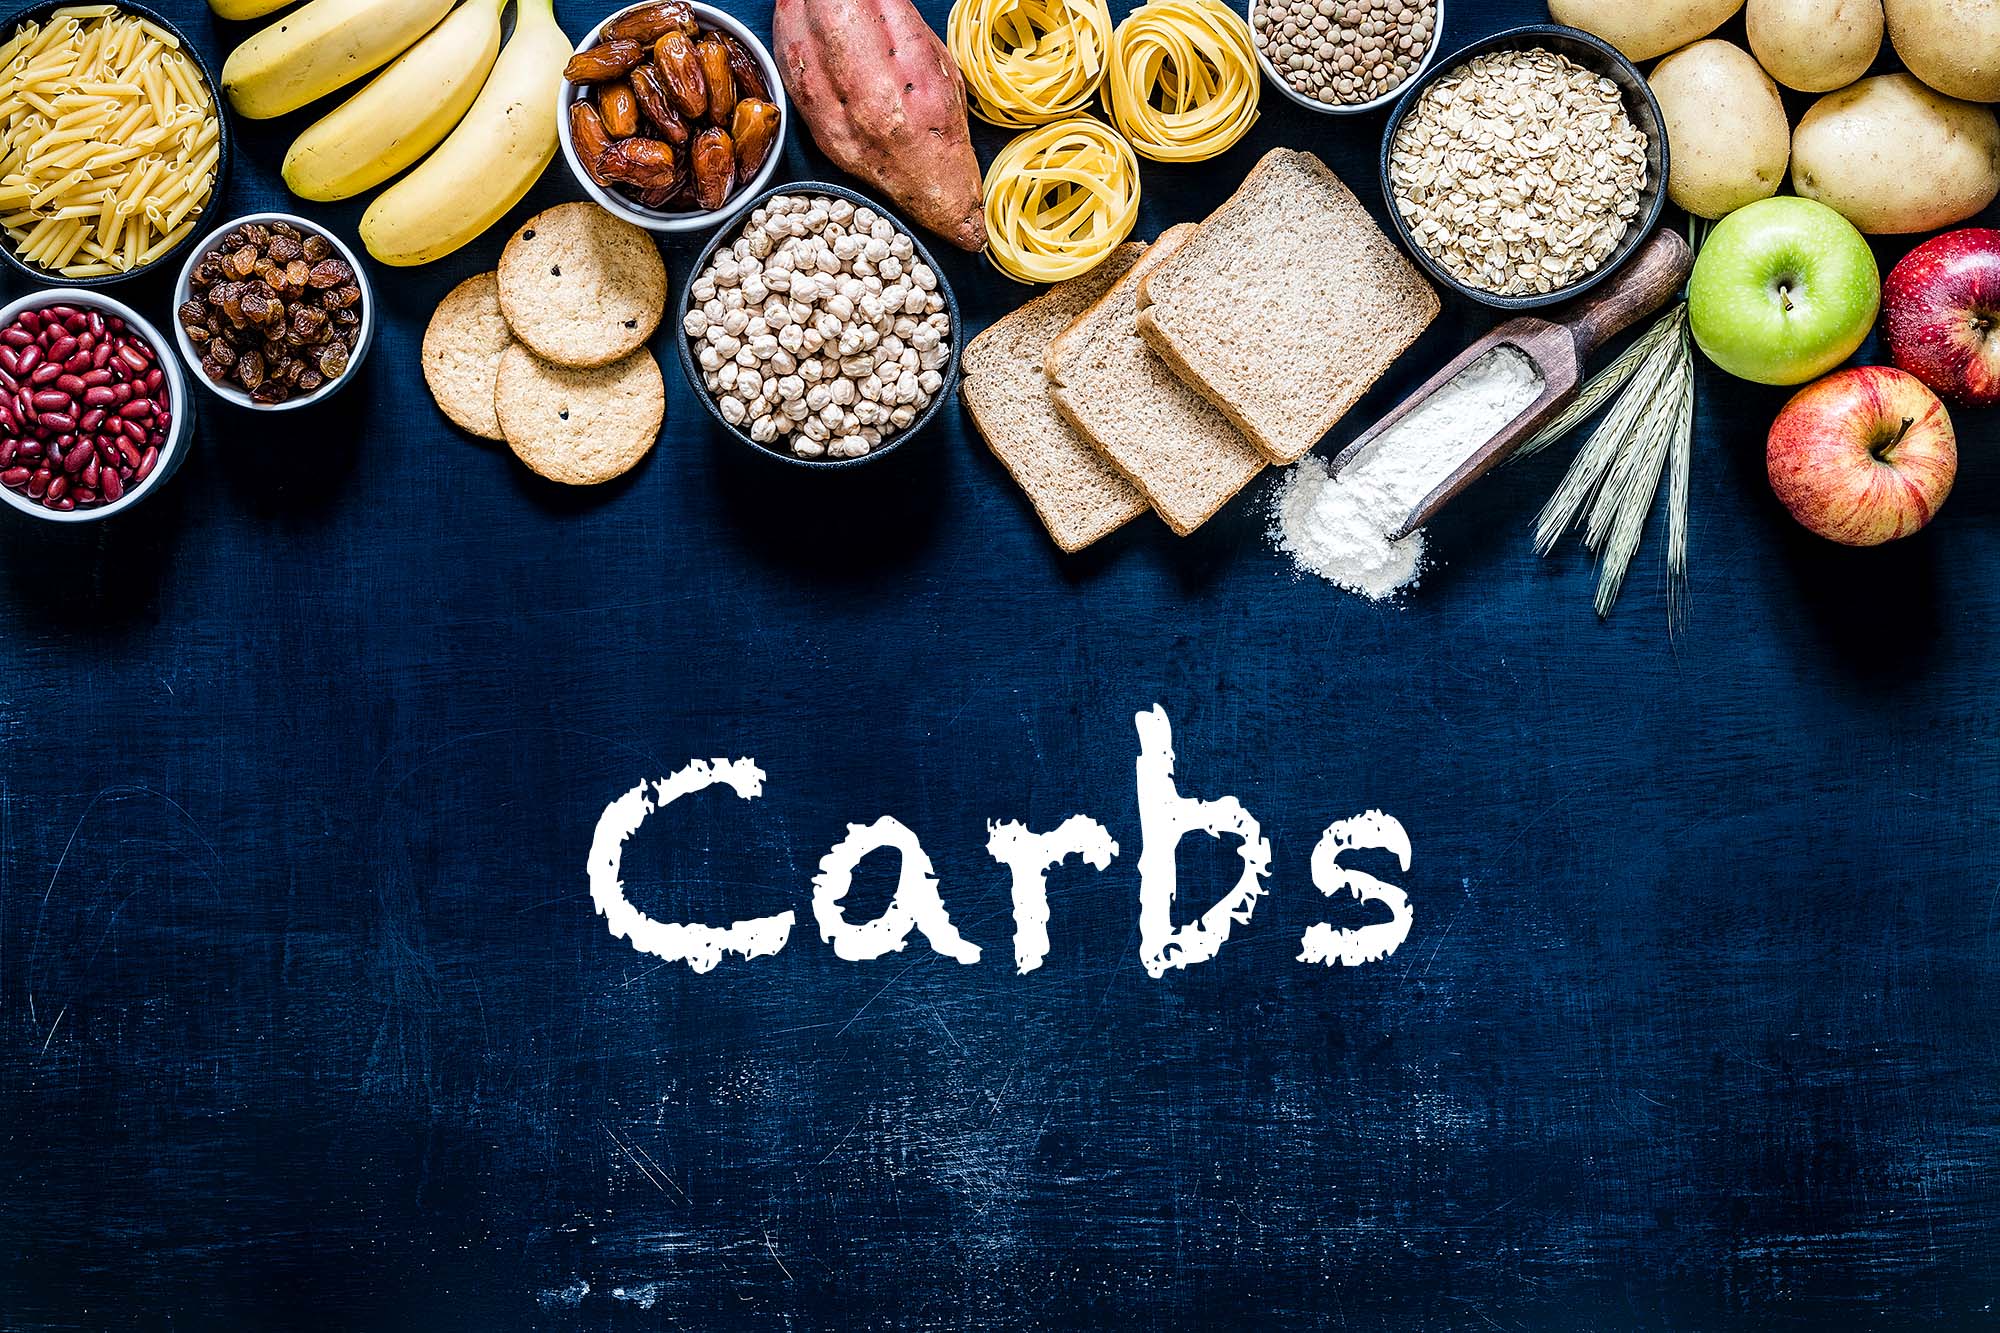 Carbohydrates – essential for energy